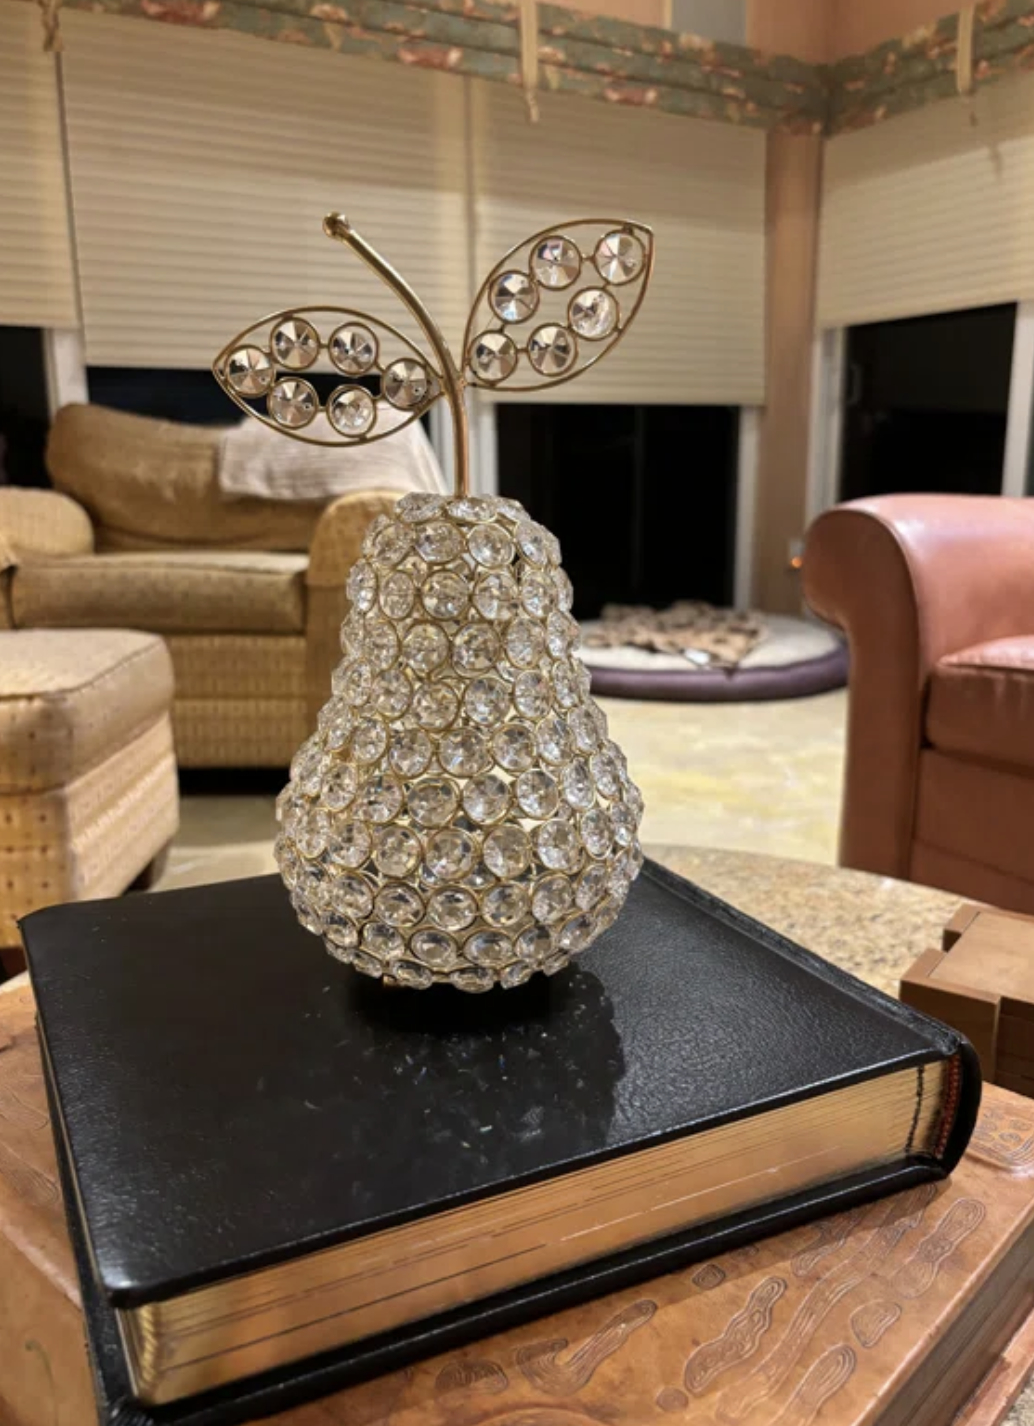 Decorative crystal pear resting on a closed book on a wooden table